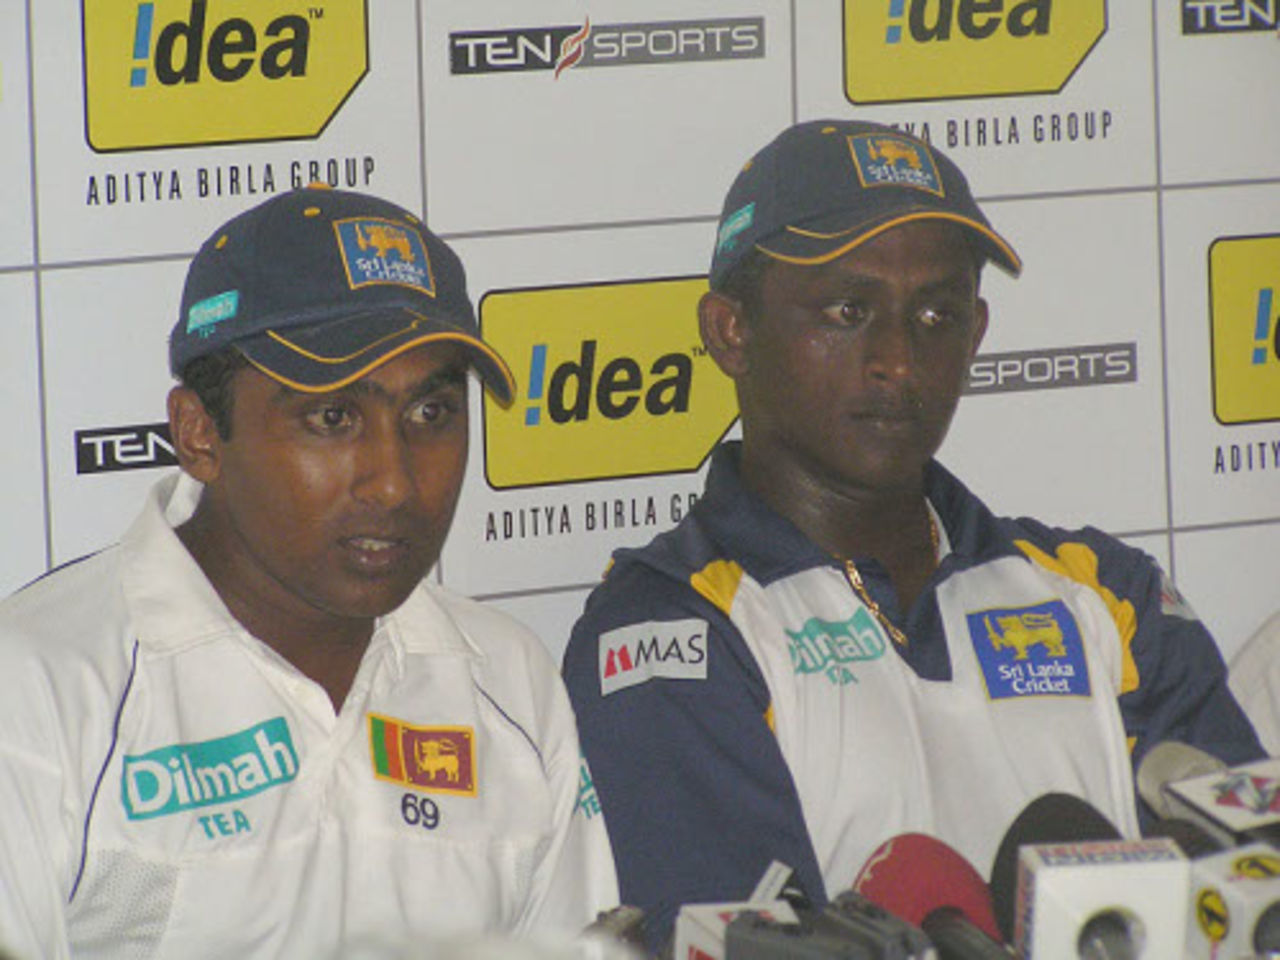 Mahela Jayawardene and Ajantha Mendis at the post-match press conference, Sri Lanka v India, 3rd Test, PSS, Colombo, 4th day, August 11, 2008